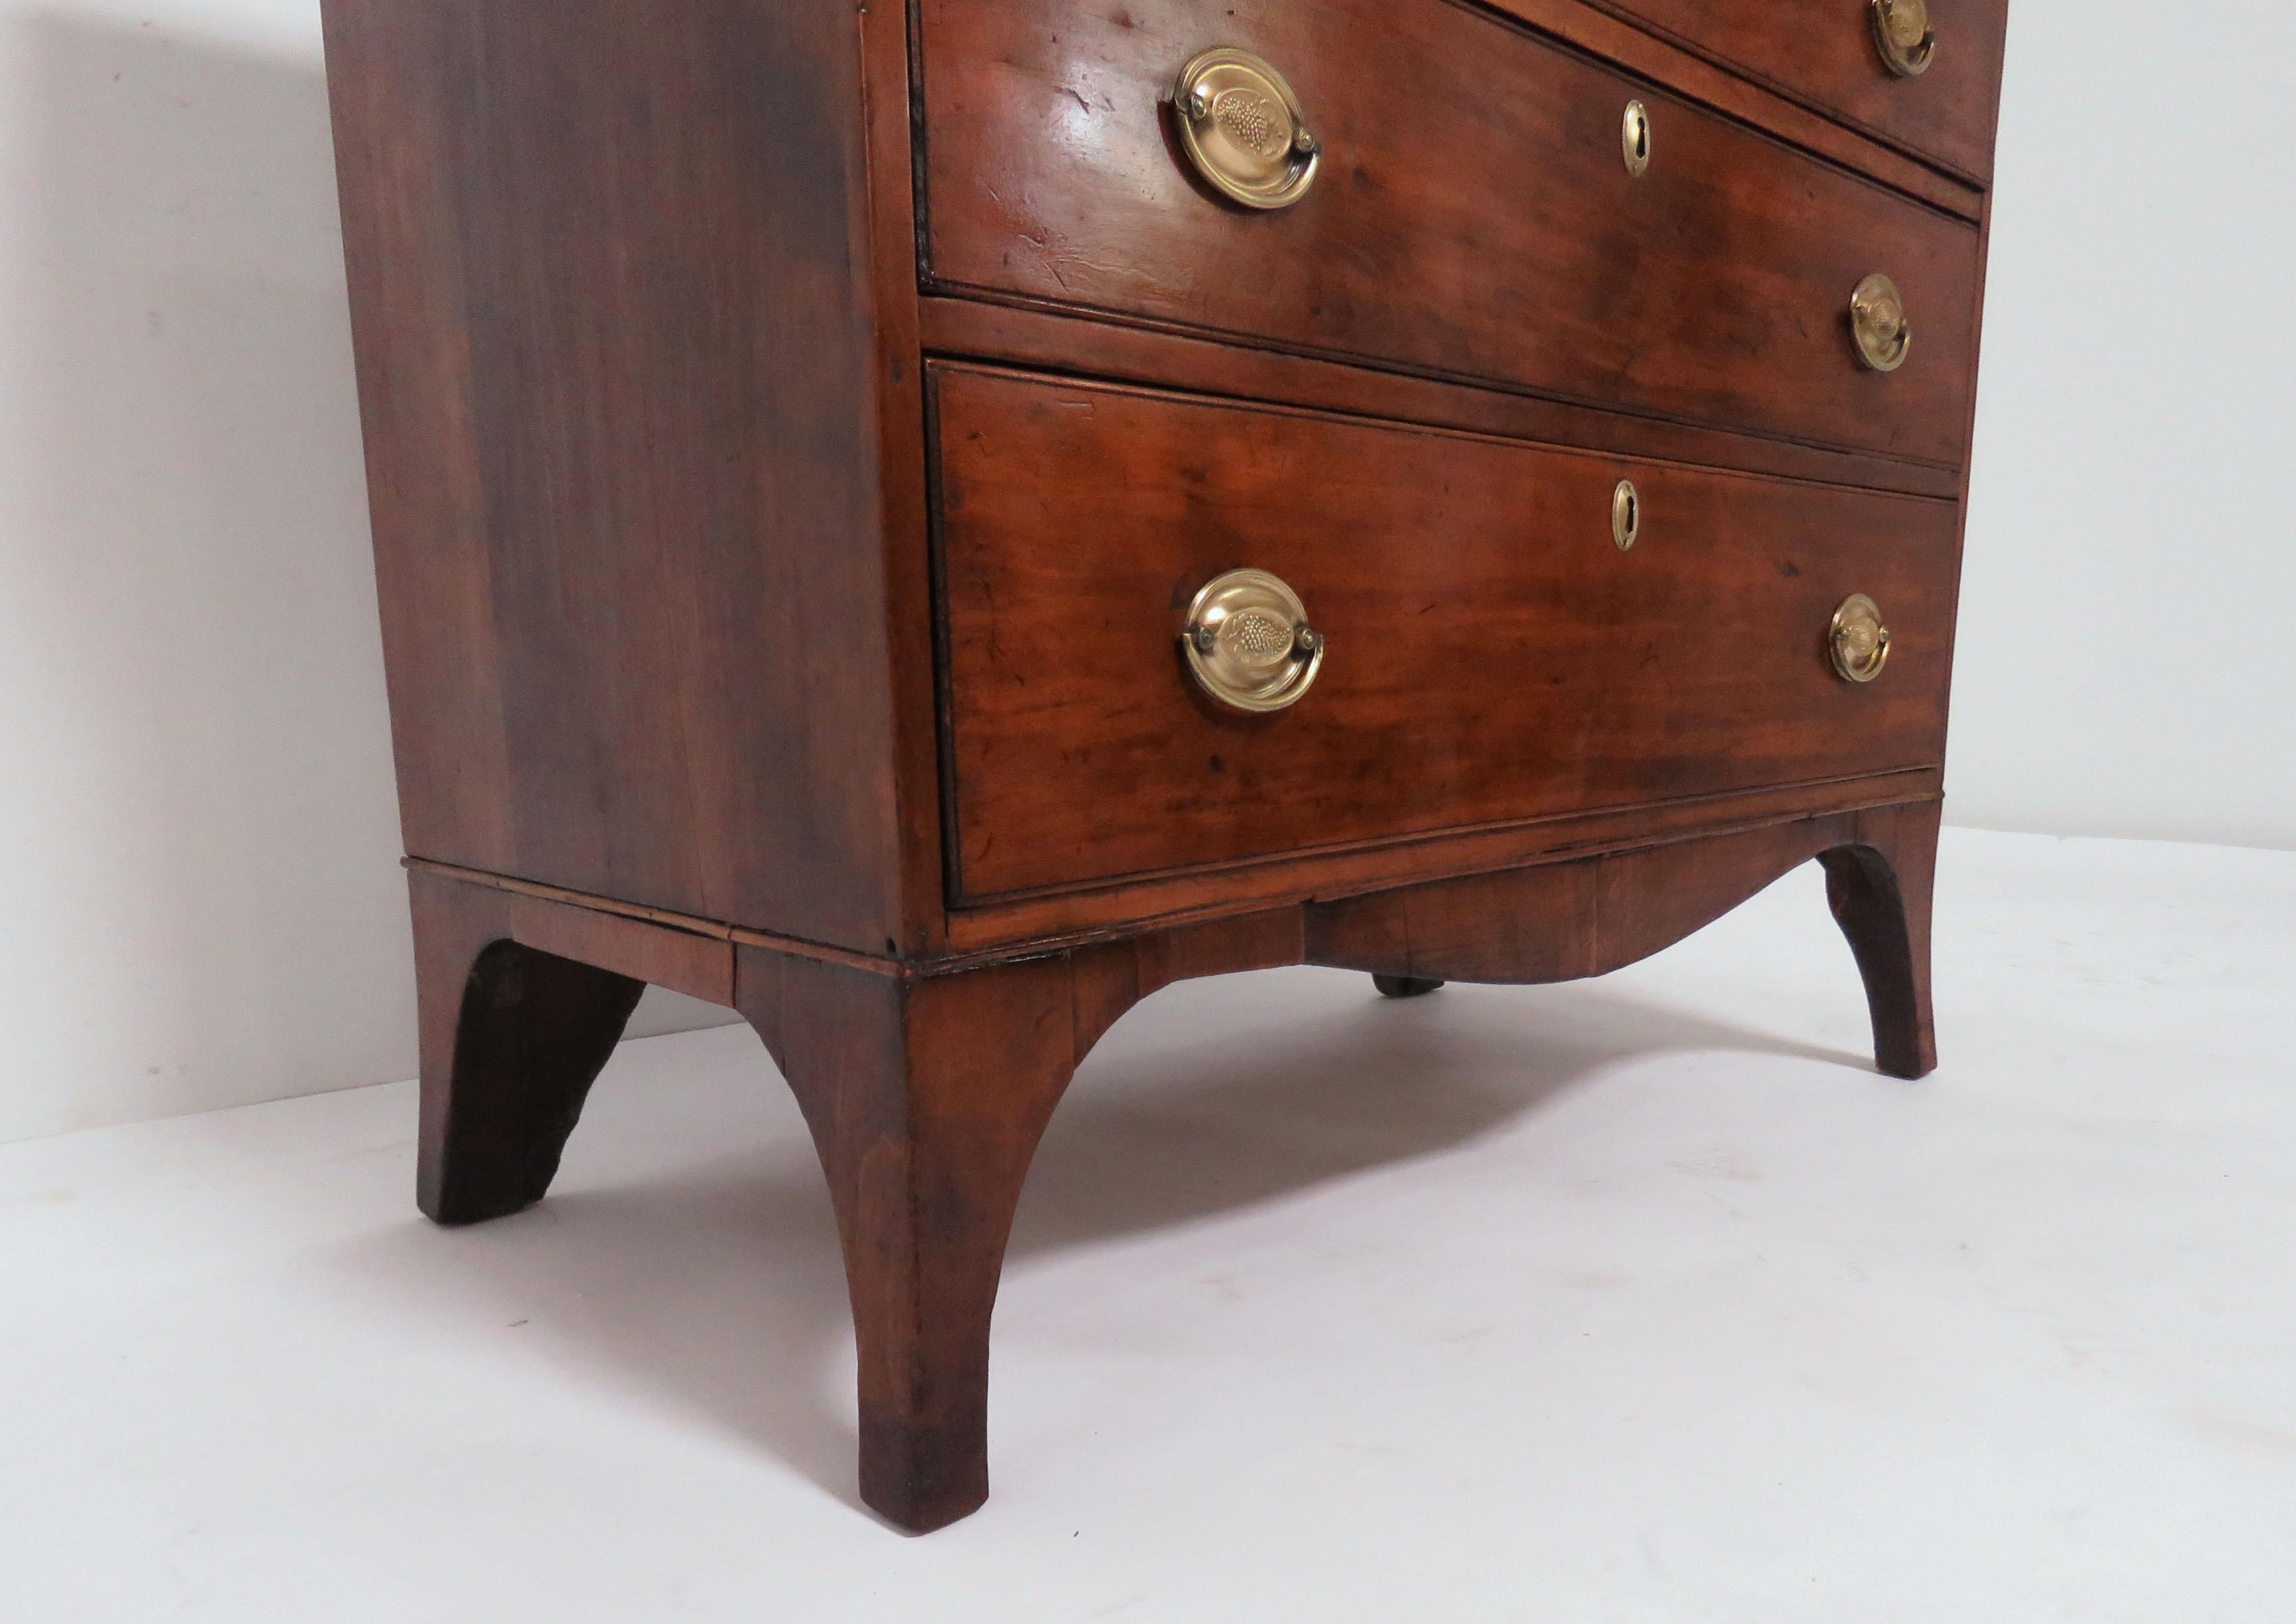 North American Late 18th Century American Federal Hepplewhite Antique Chest of Drawers